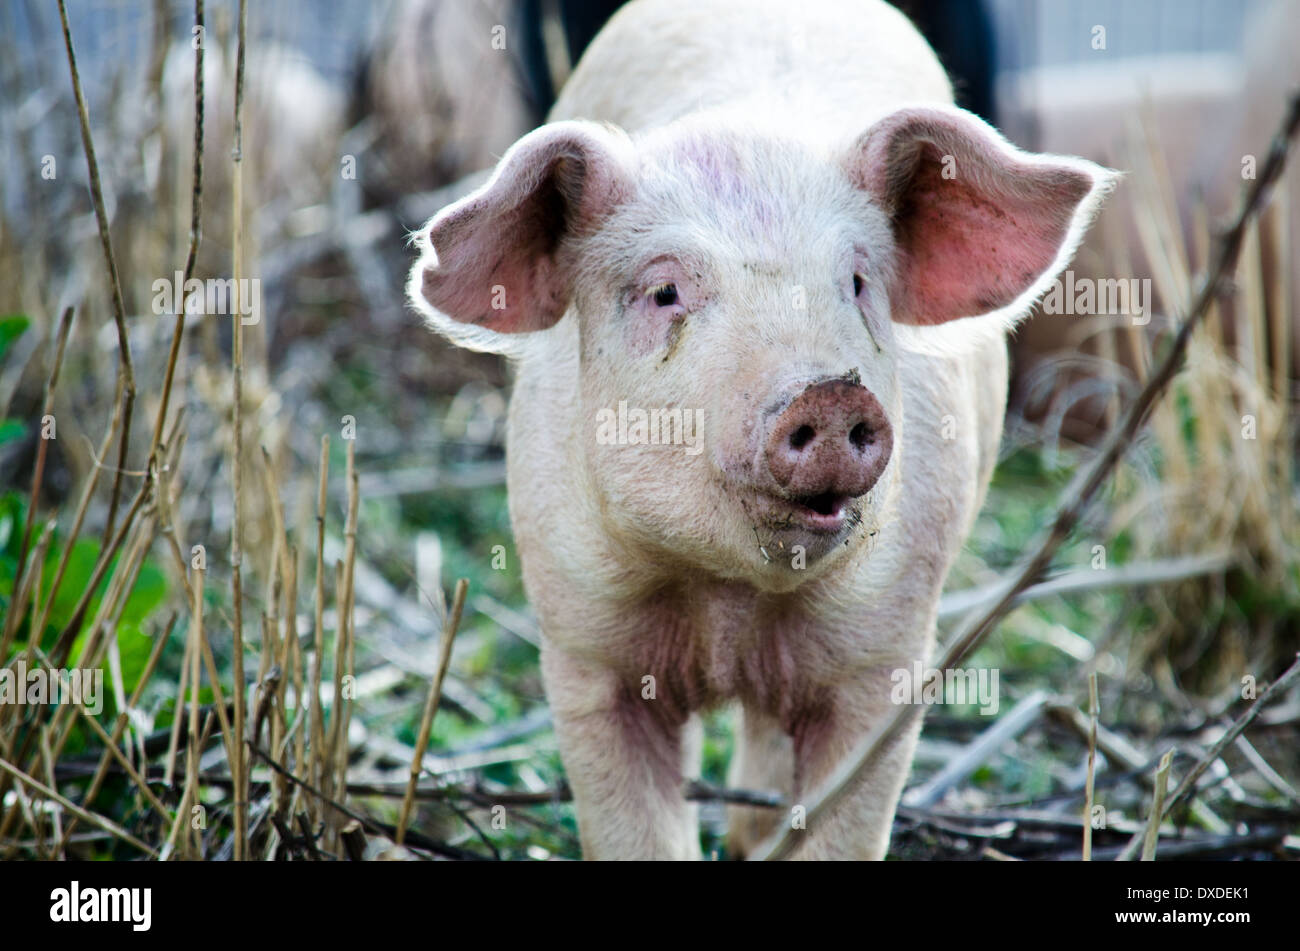 Domestic Pig, showing head, snout and large ears Stock Photo